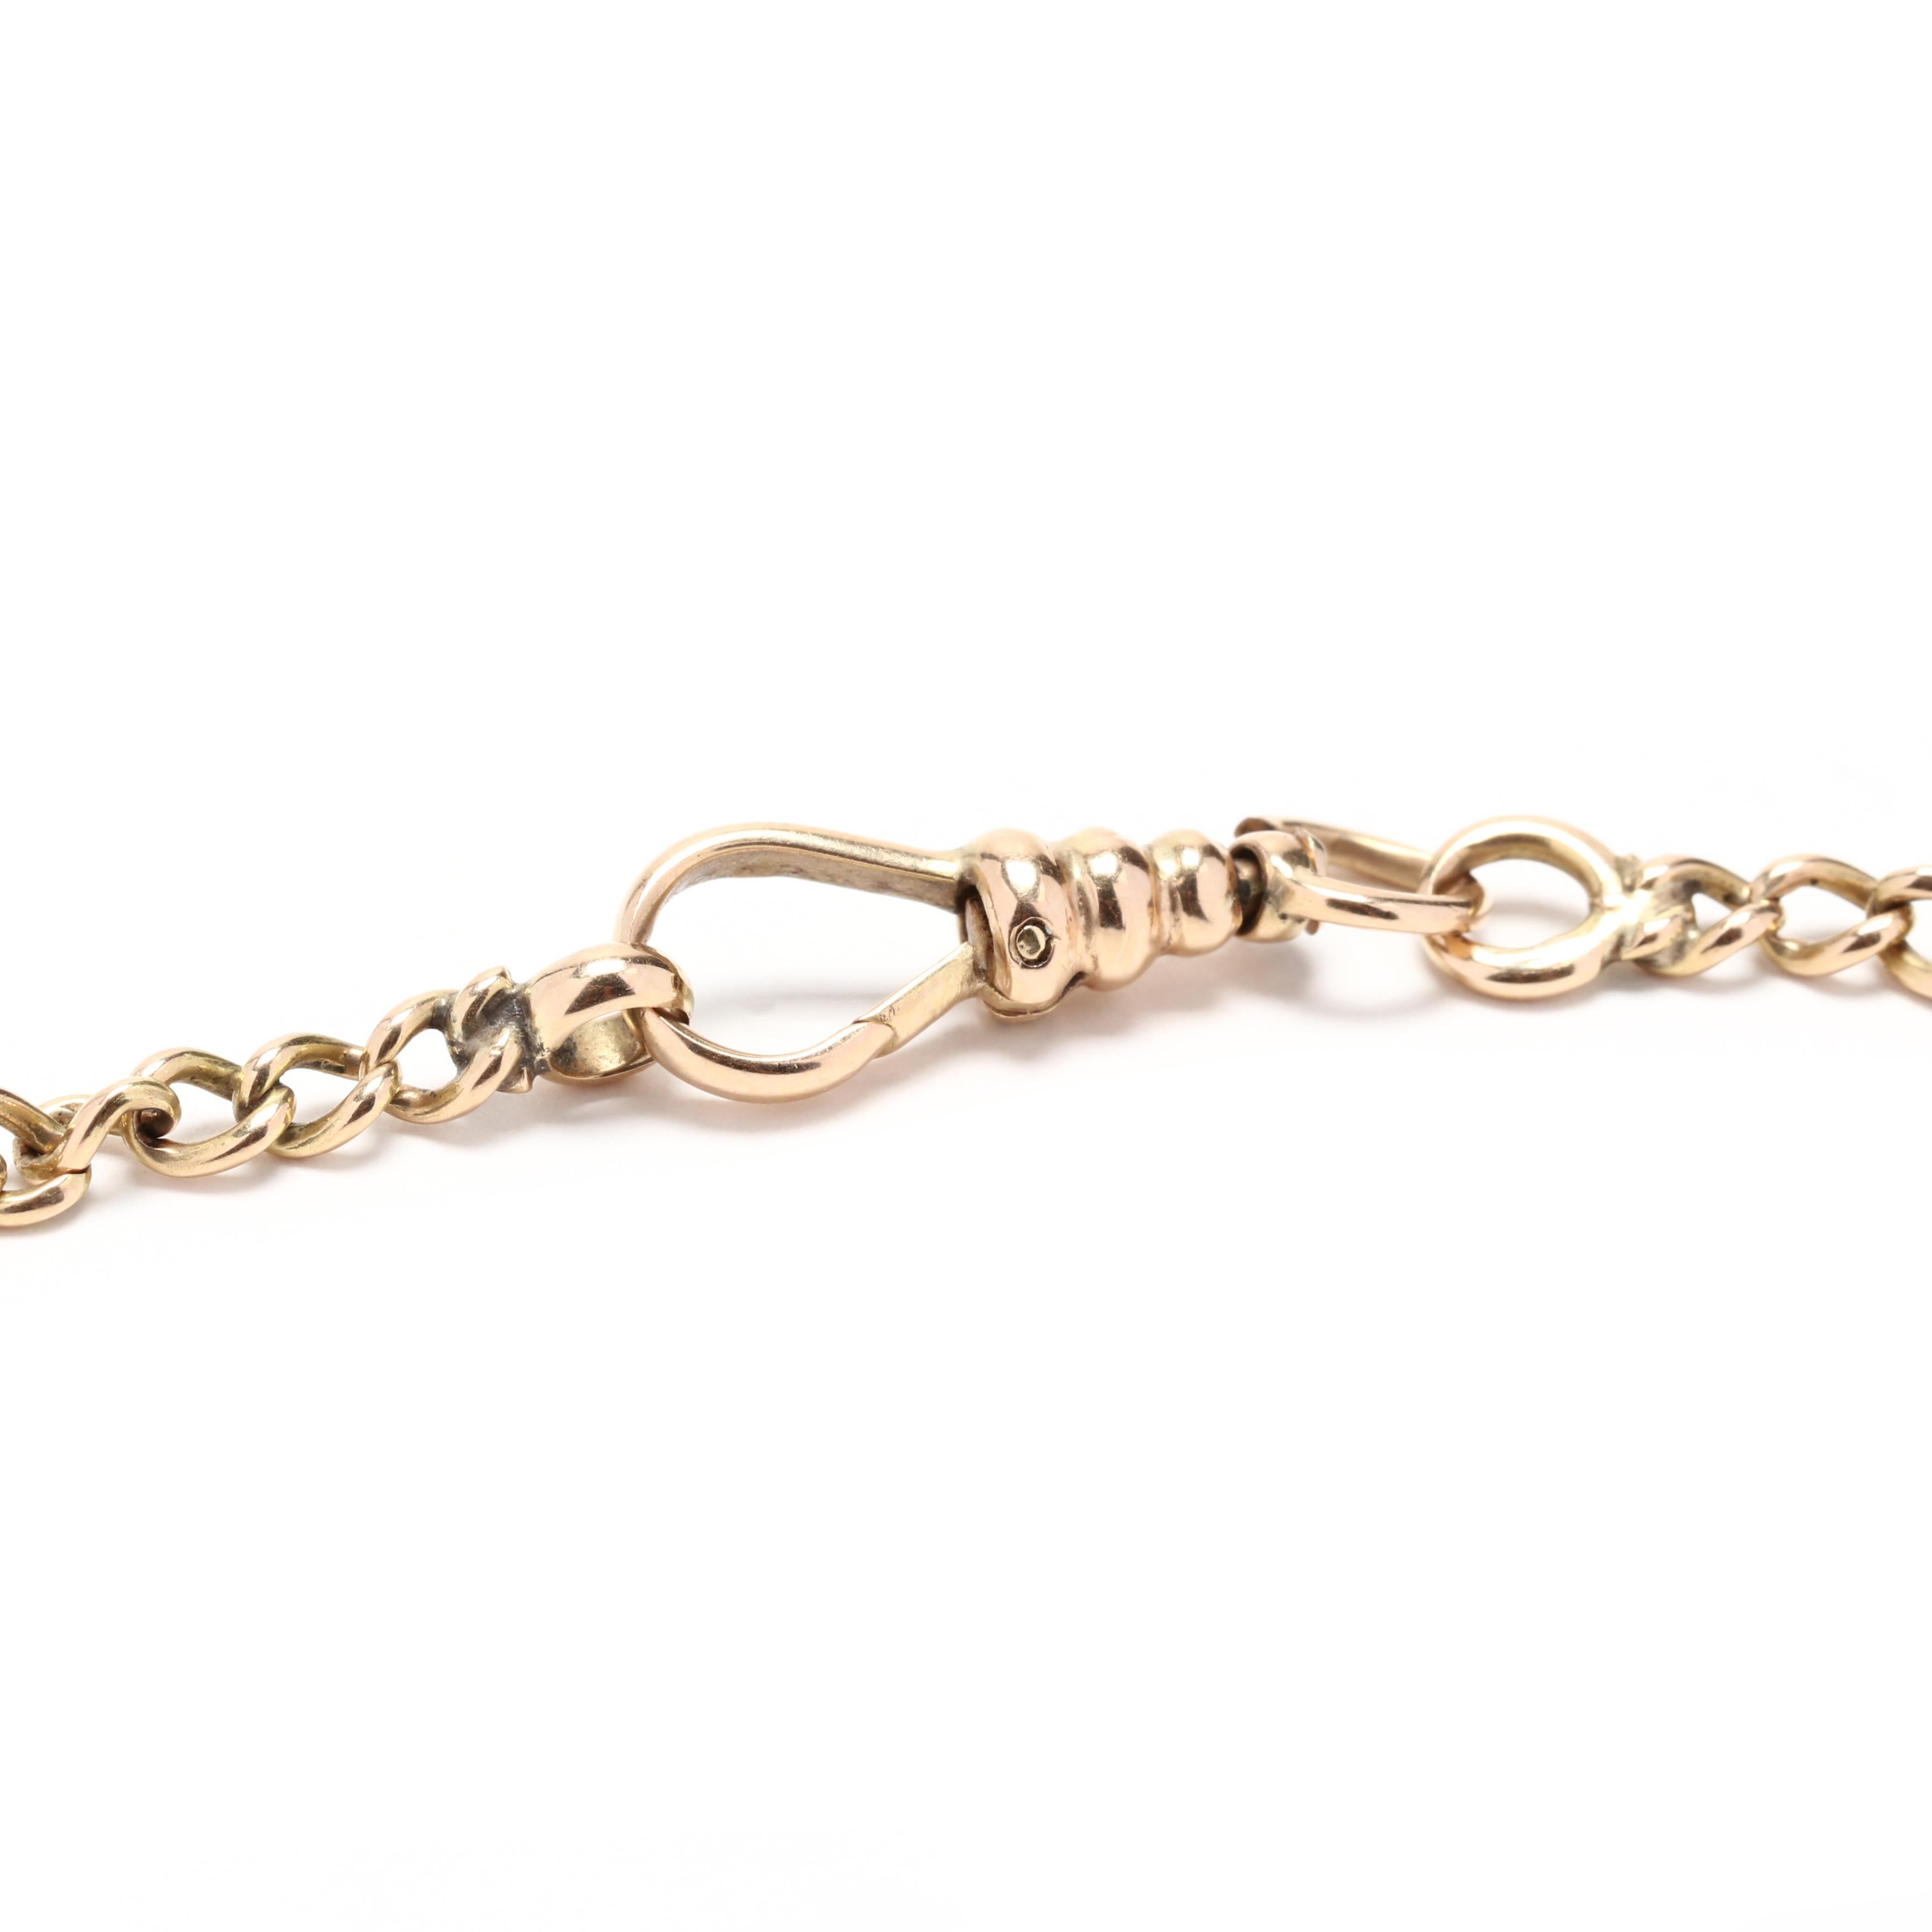 14K Antique Austro-Hungarian Lonzenge Link Chain In Good Condition For Sale In McLeansville, NC